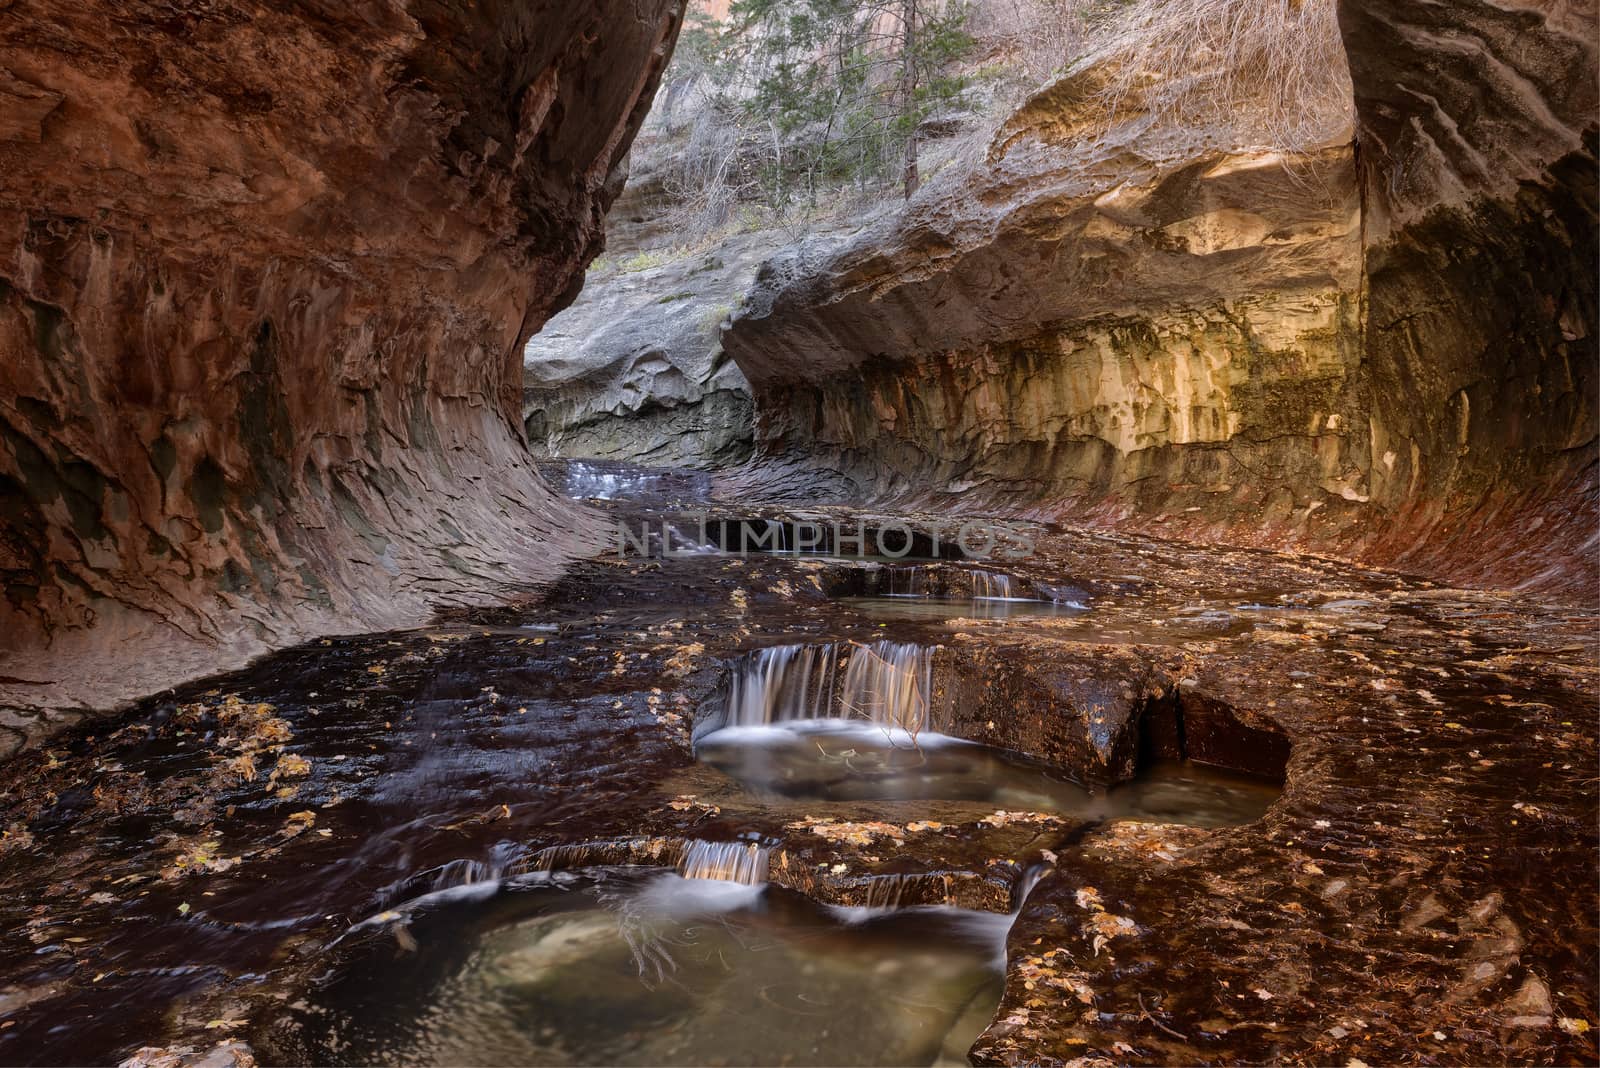 The dark entrance to the famous Subway, a famous slot canyon in the Left Fork North Creek, Zion National Park.